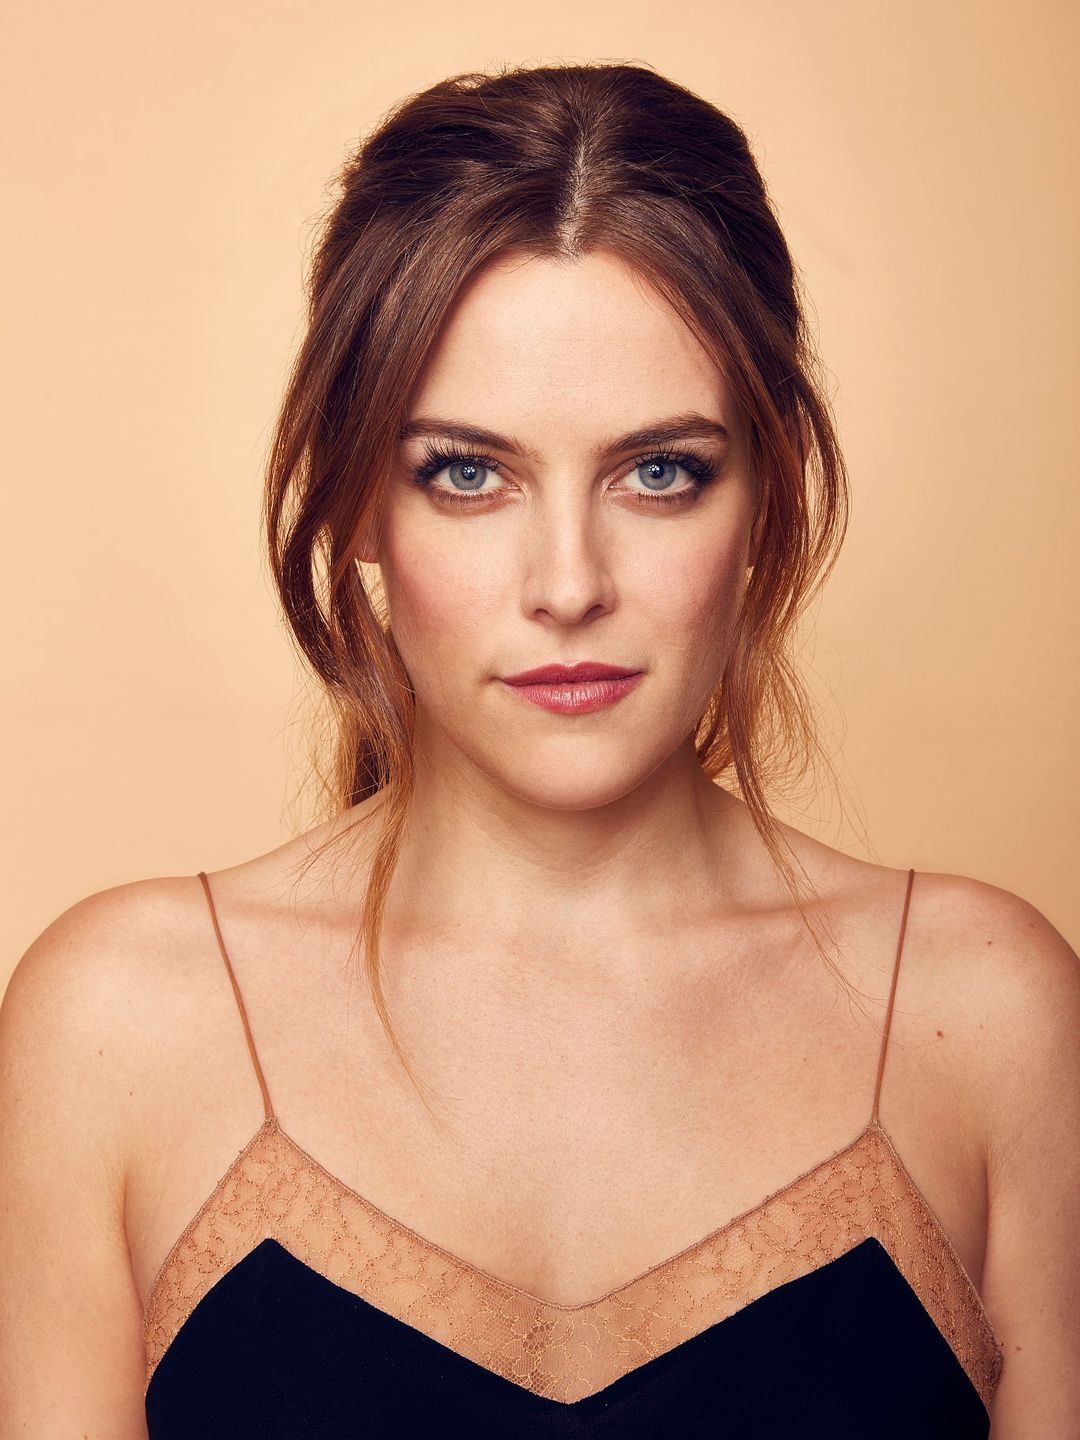 Riley Keough does she have a husband